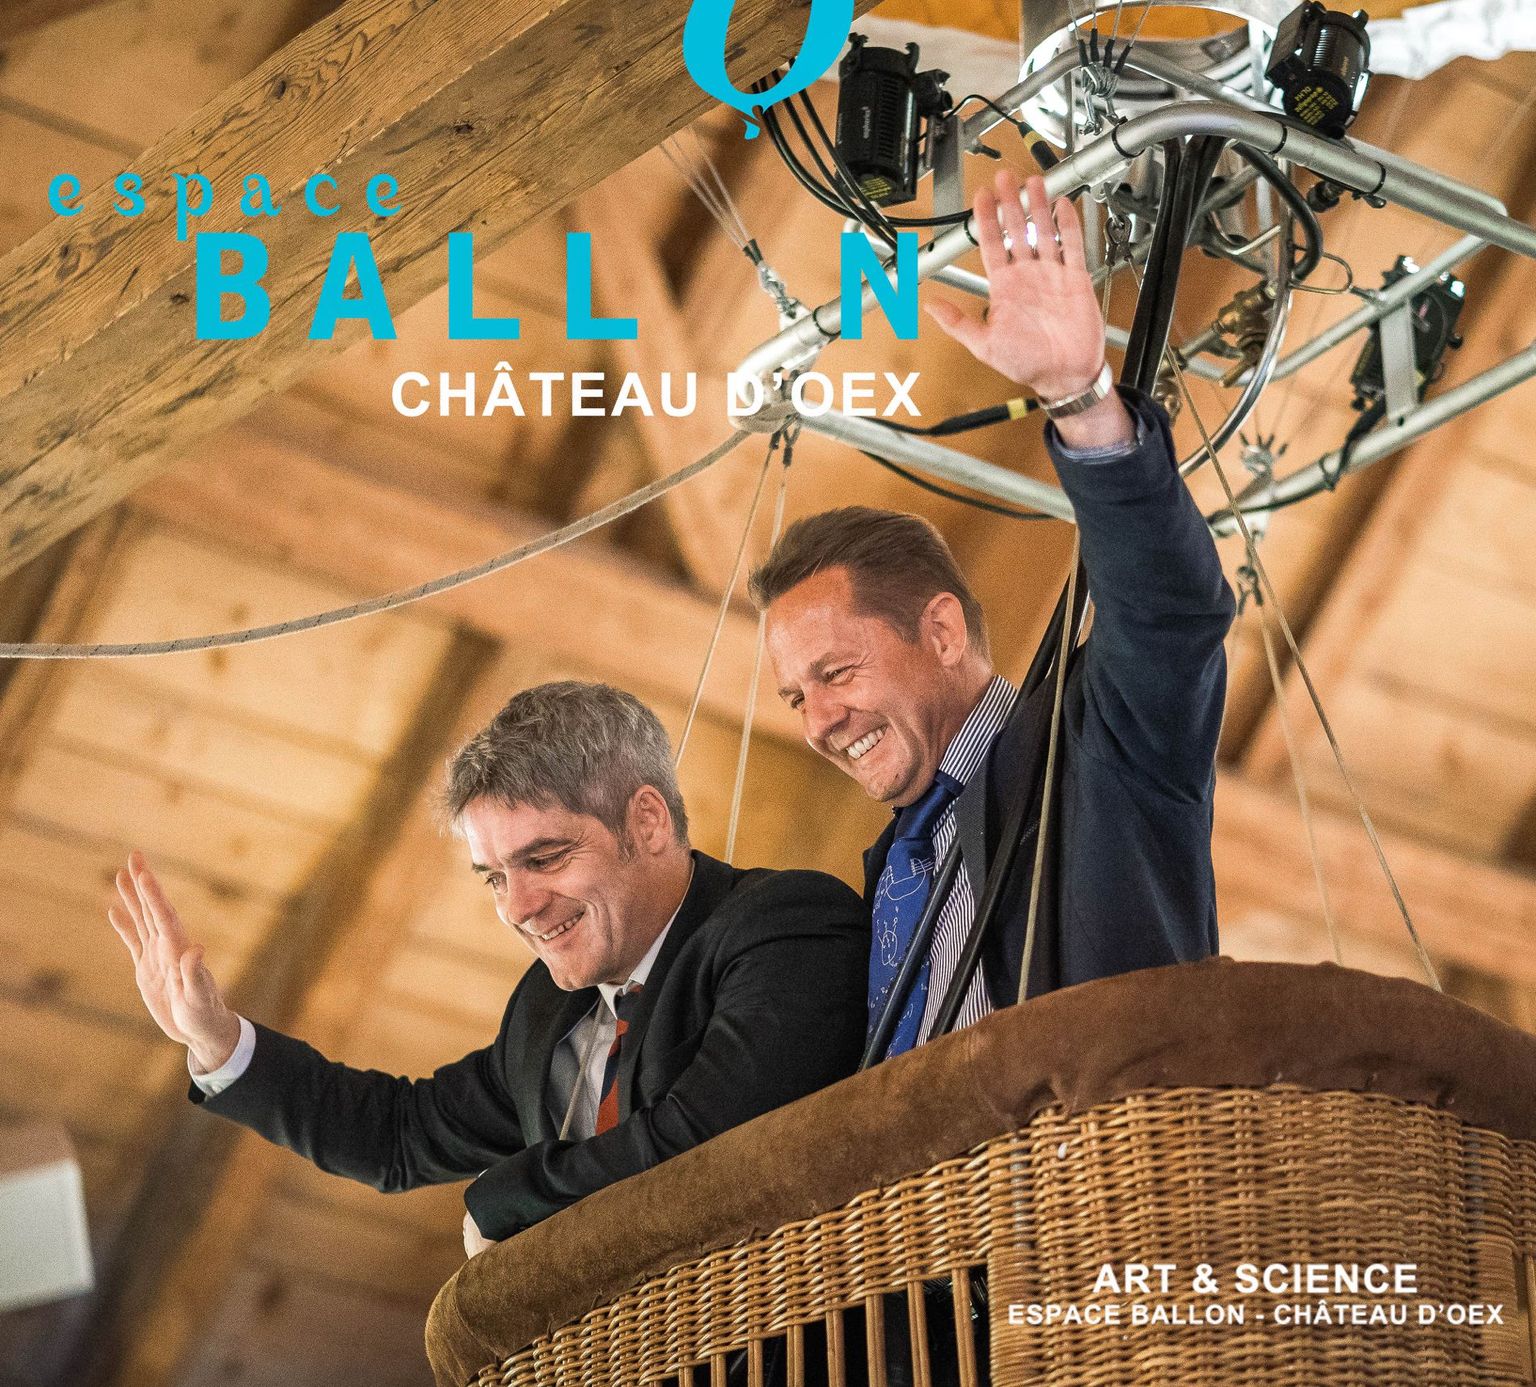 Michael Hoch and Hans Peter Beck are the main contributors to the Art & Science exhibition at the Balloon museum in Château d'Oex